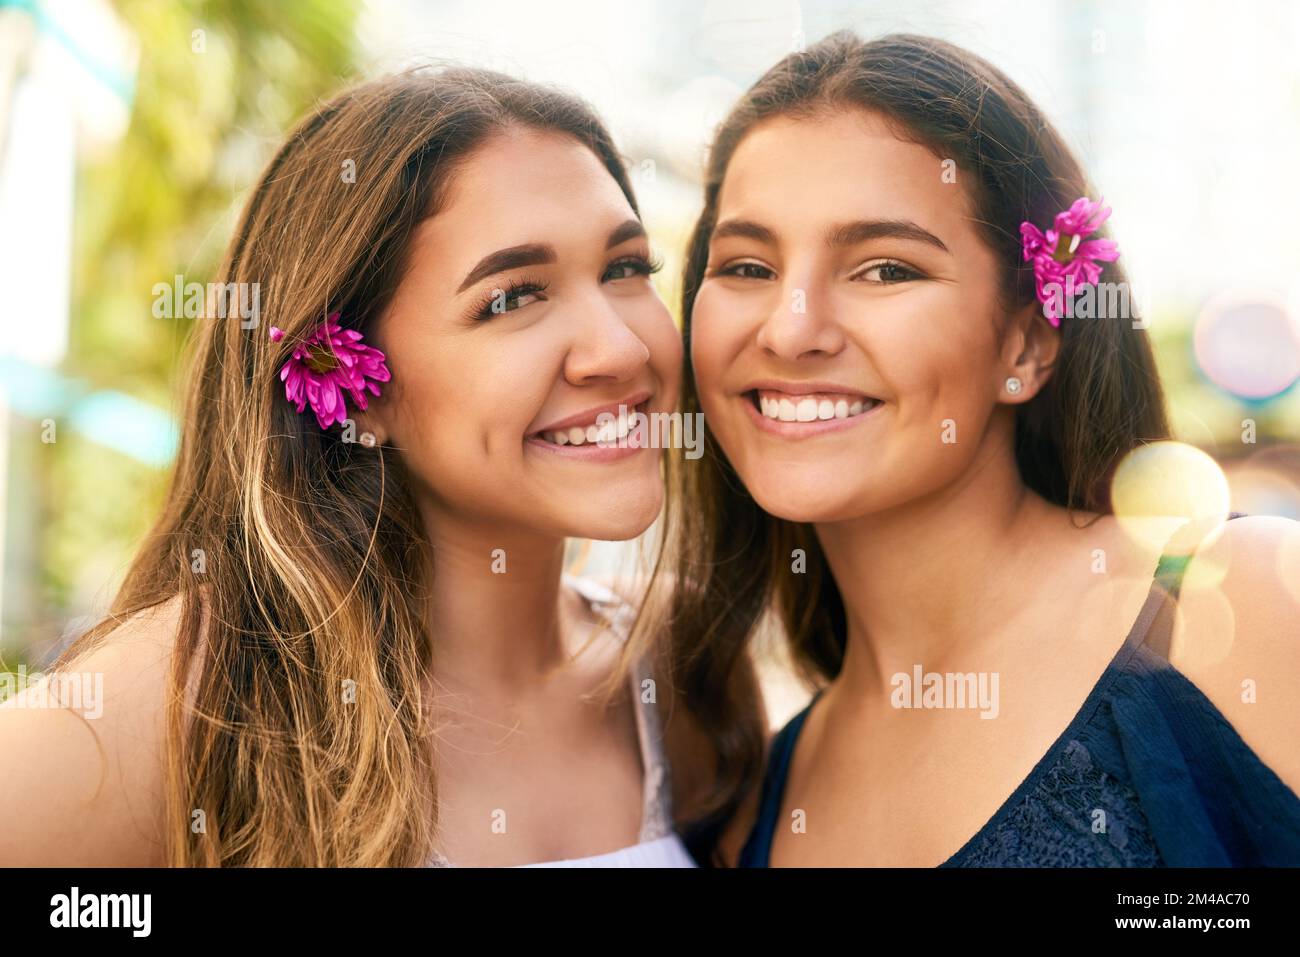 Our friendship blossoms more everyday. Portrait of two female best friends spending the day in the city. Stock Photo